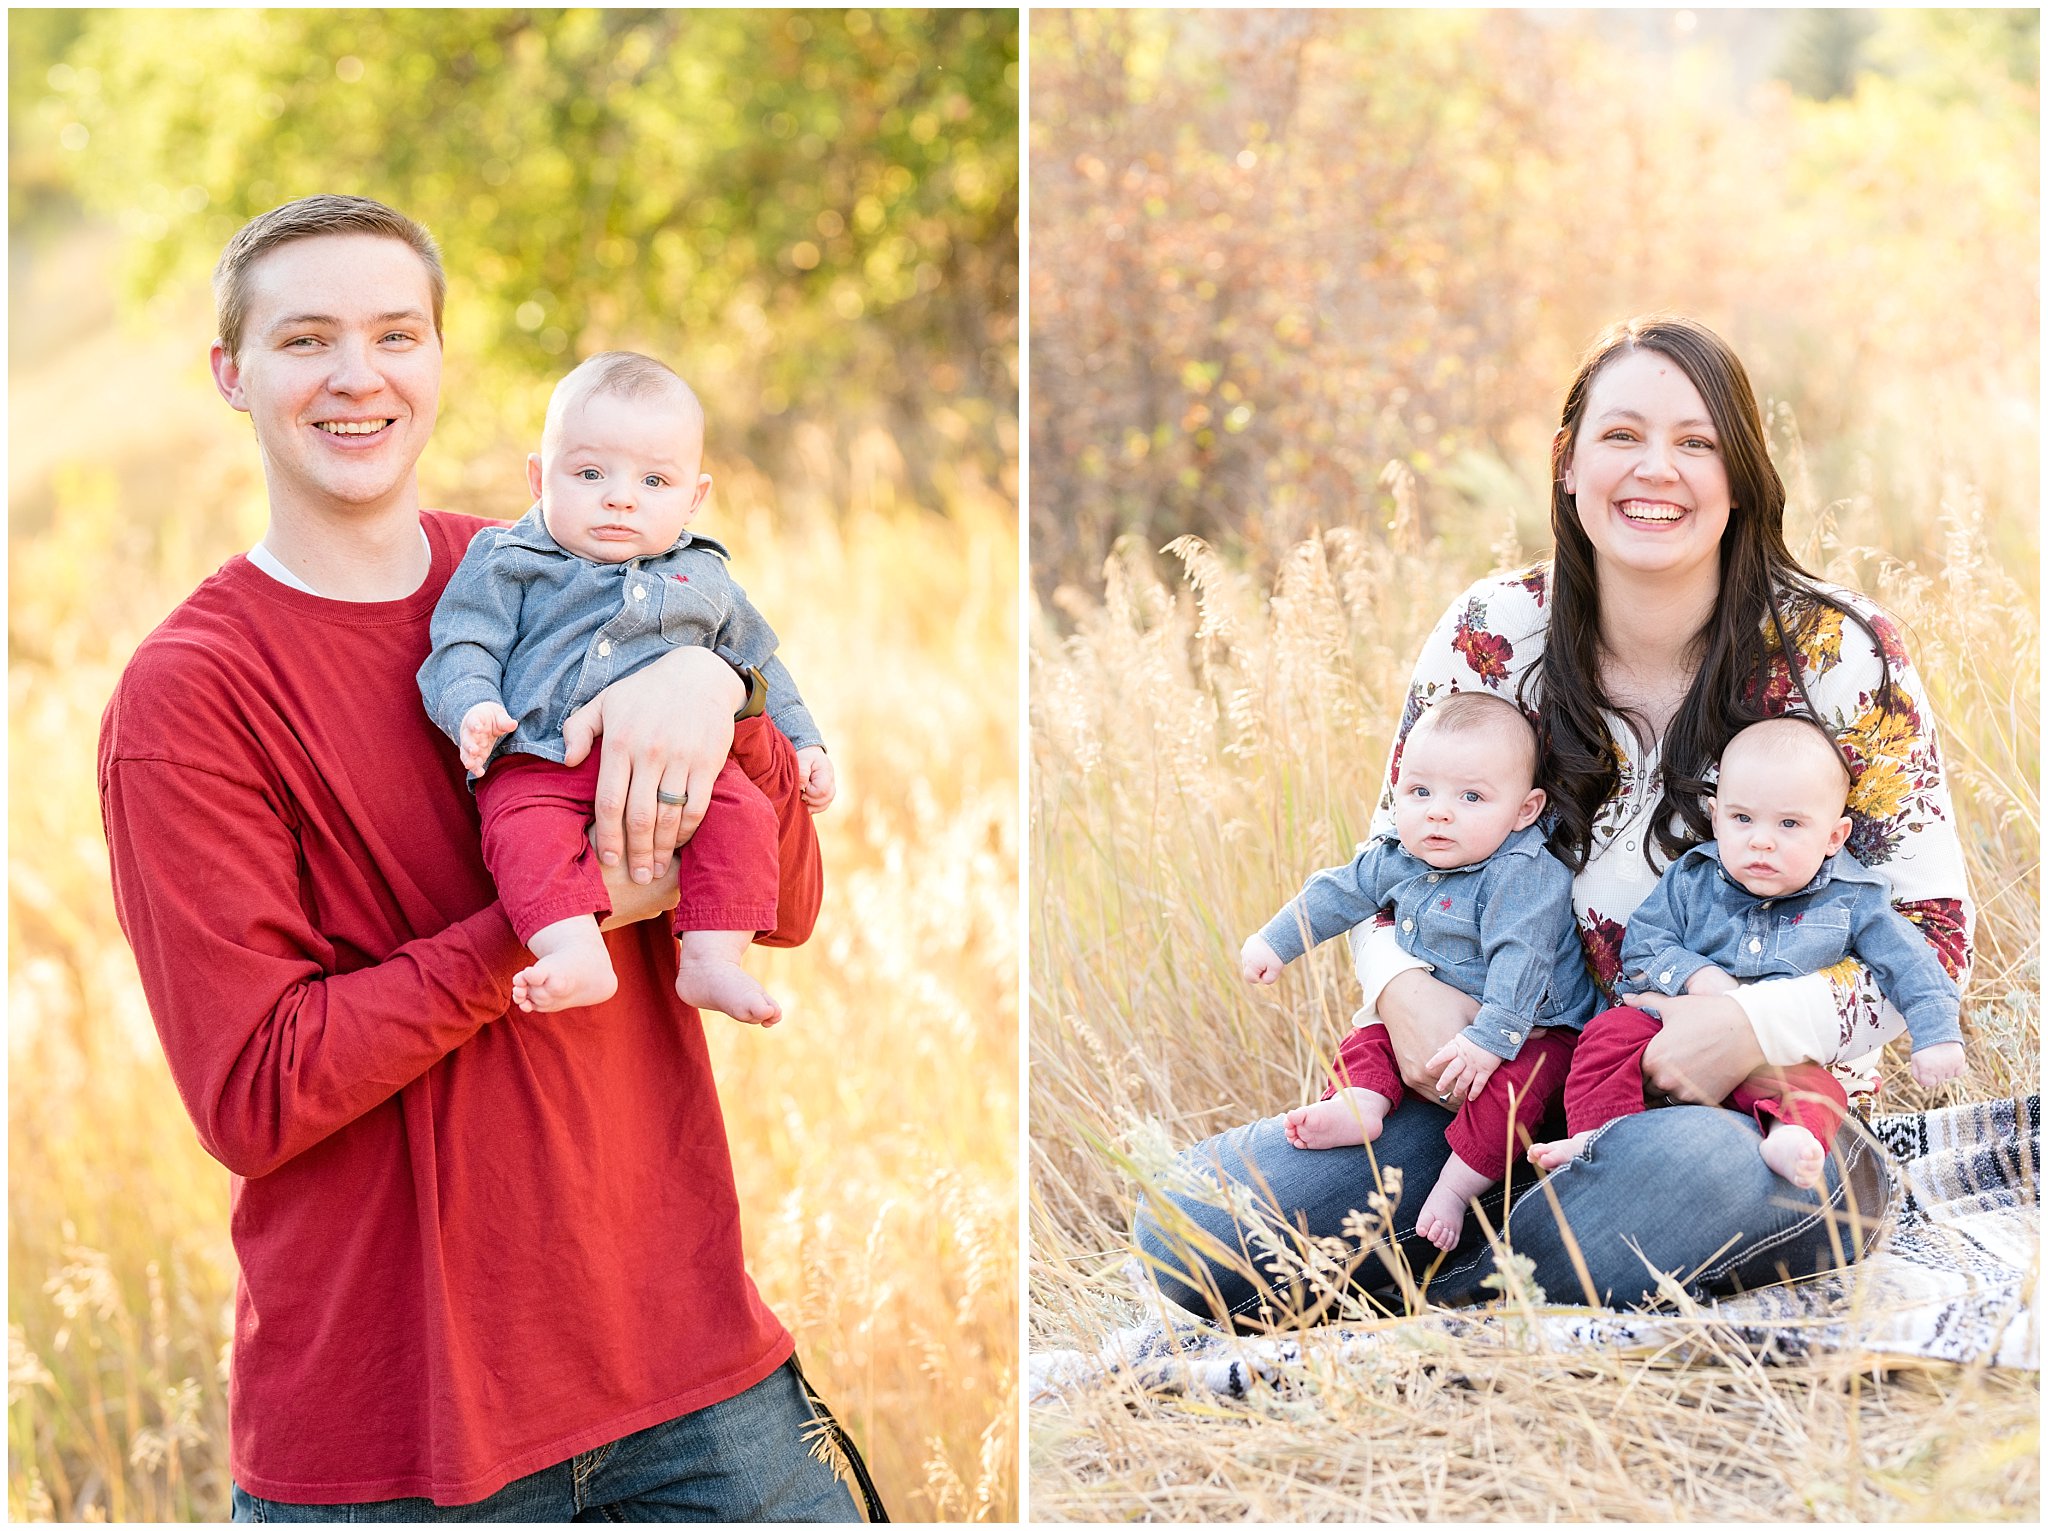 Mom with twin babies and dad with one twin | Fall Family Pictures at Snowbasin | Jessie and Dallin Photography